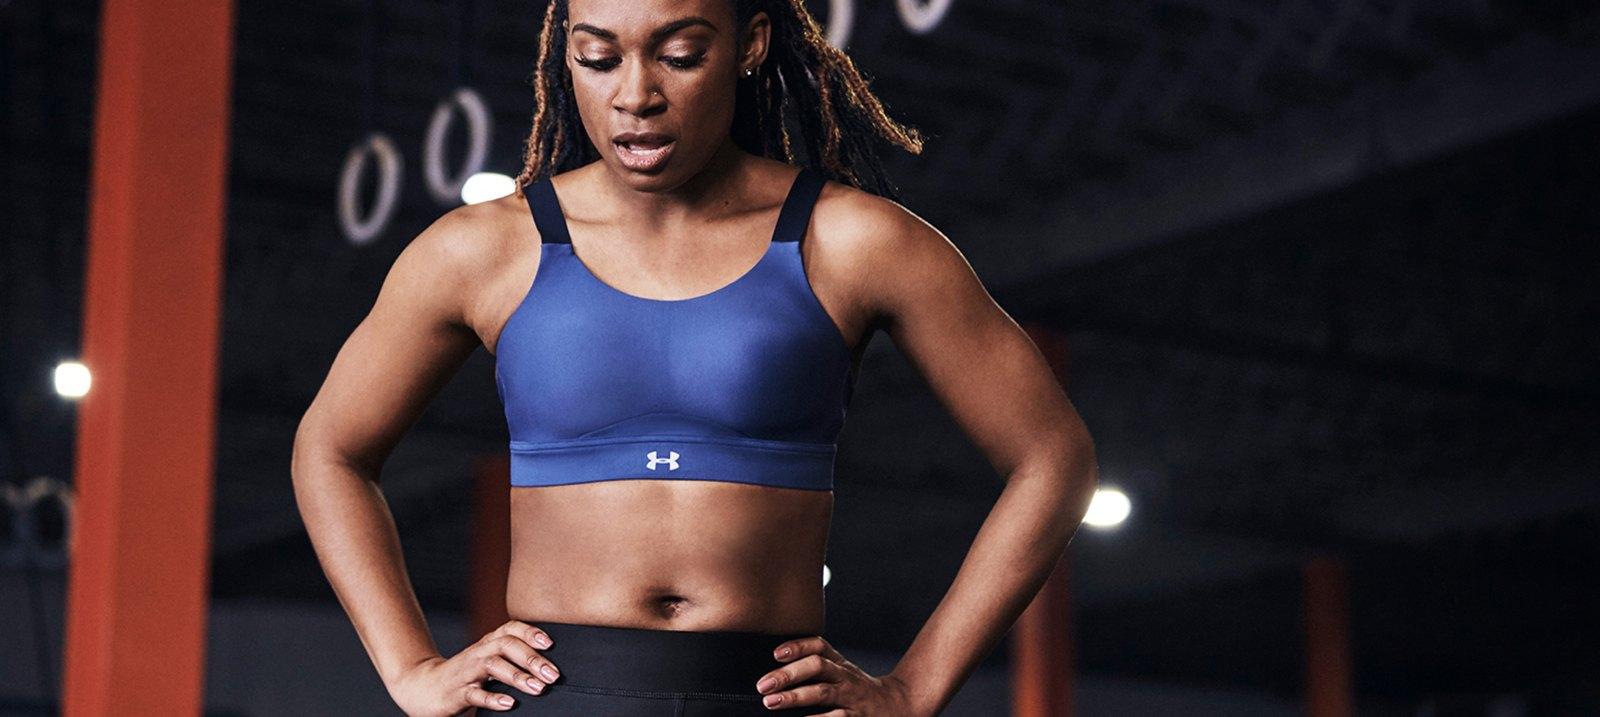 Under Armour: Women's Training and Apparel